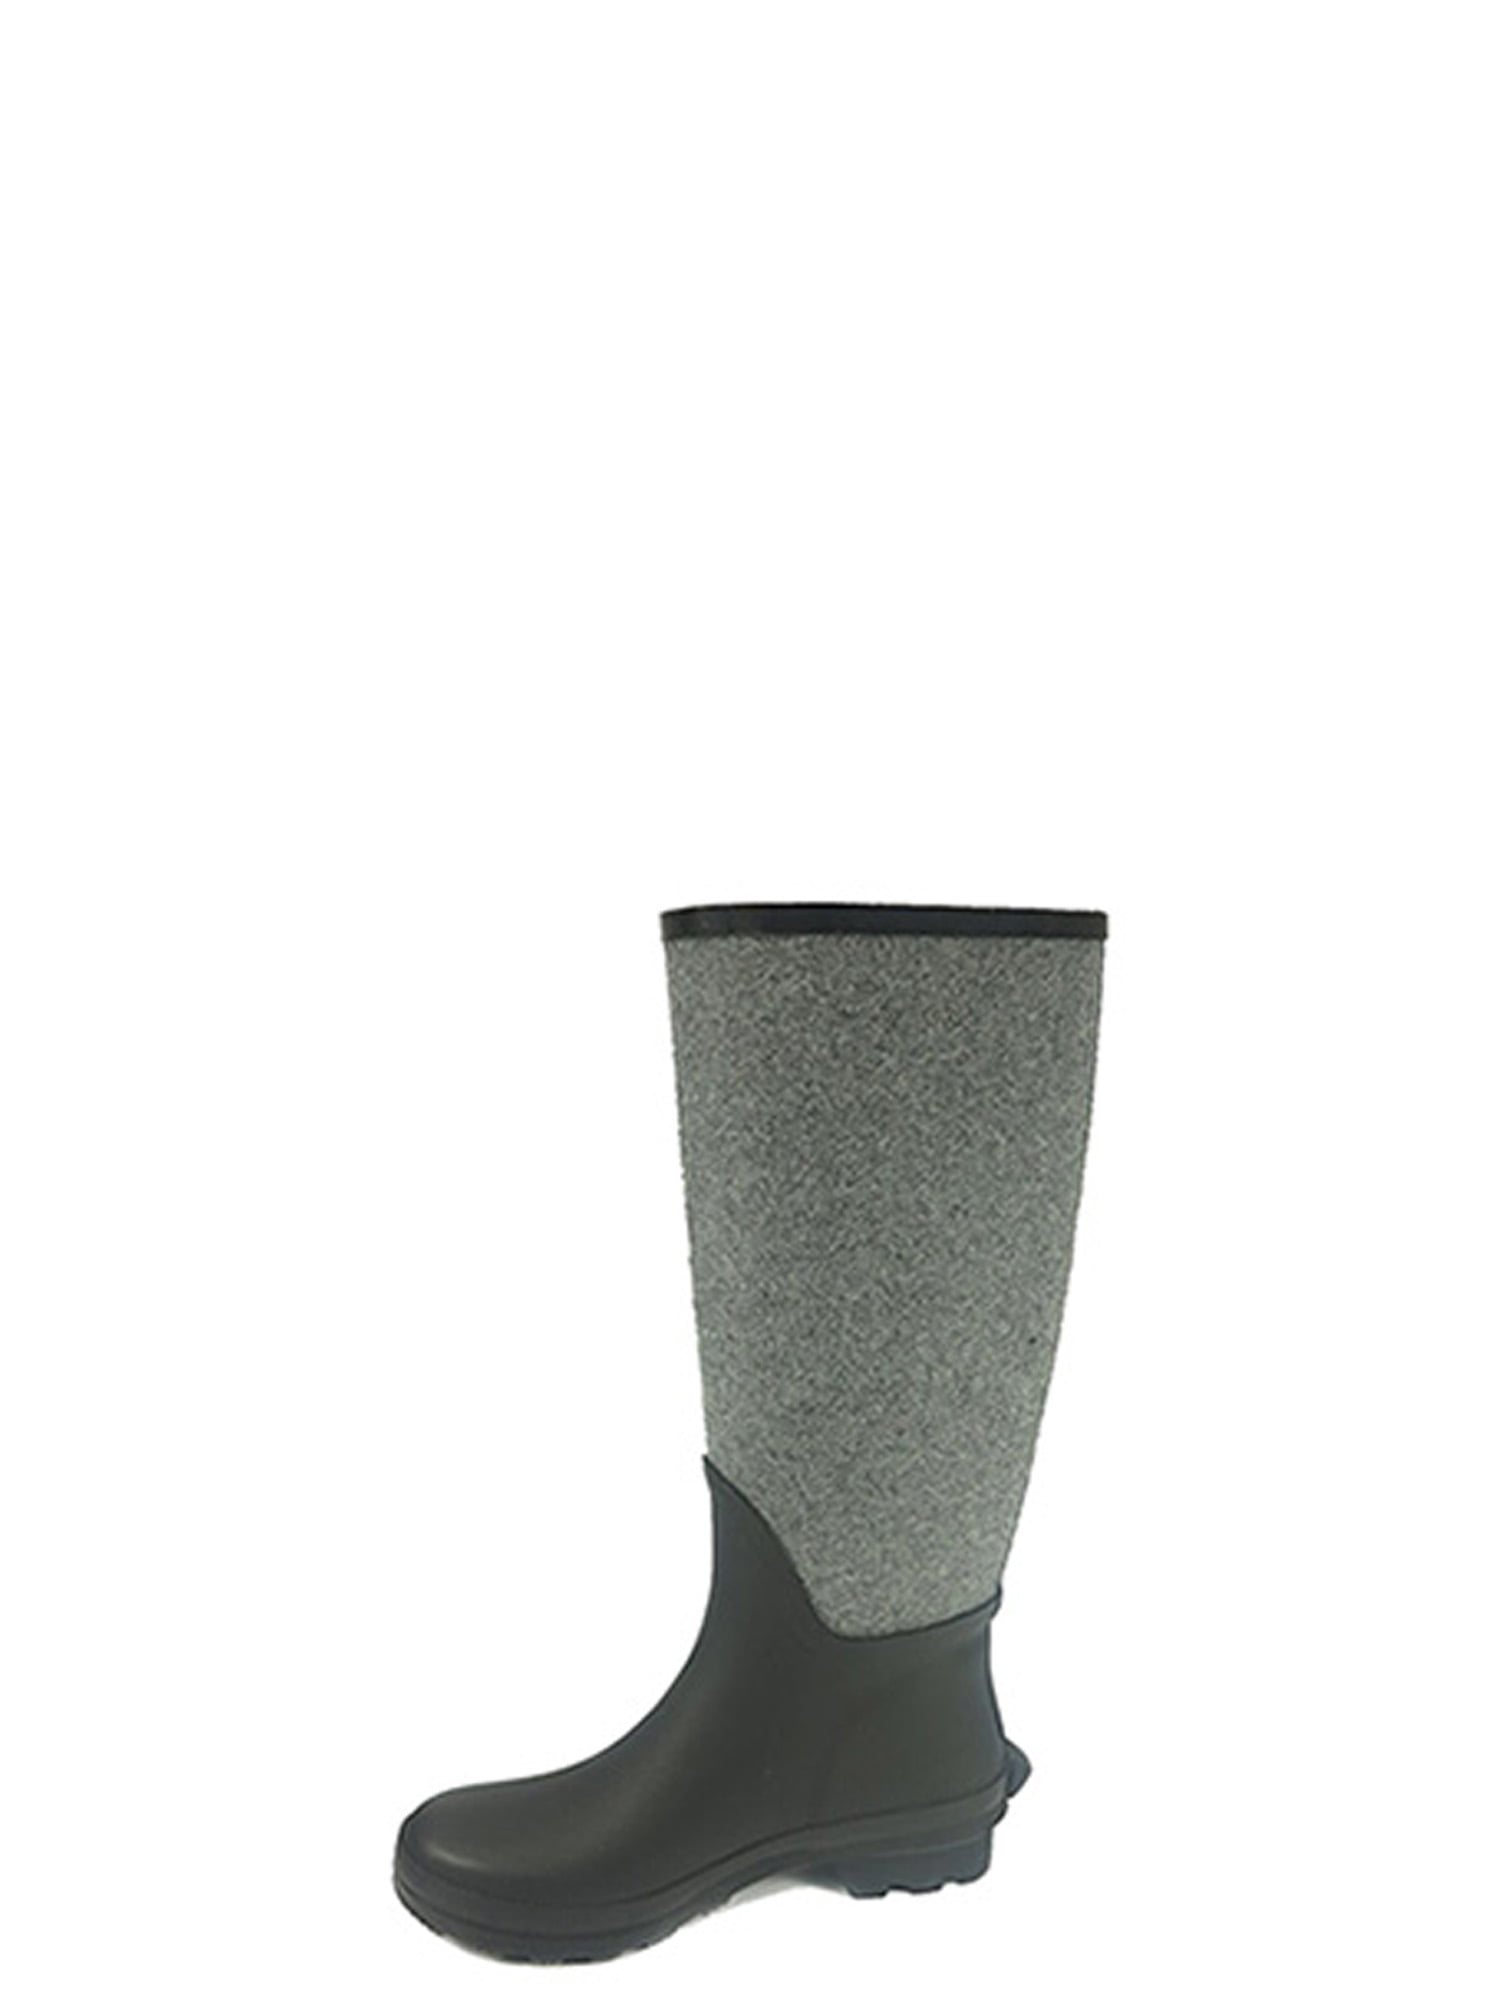 Women's Time and Tru Tall Rubber Boots 